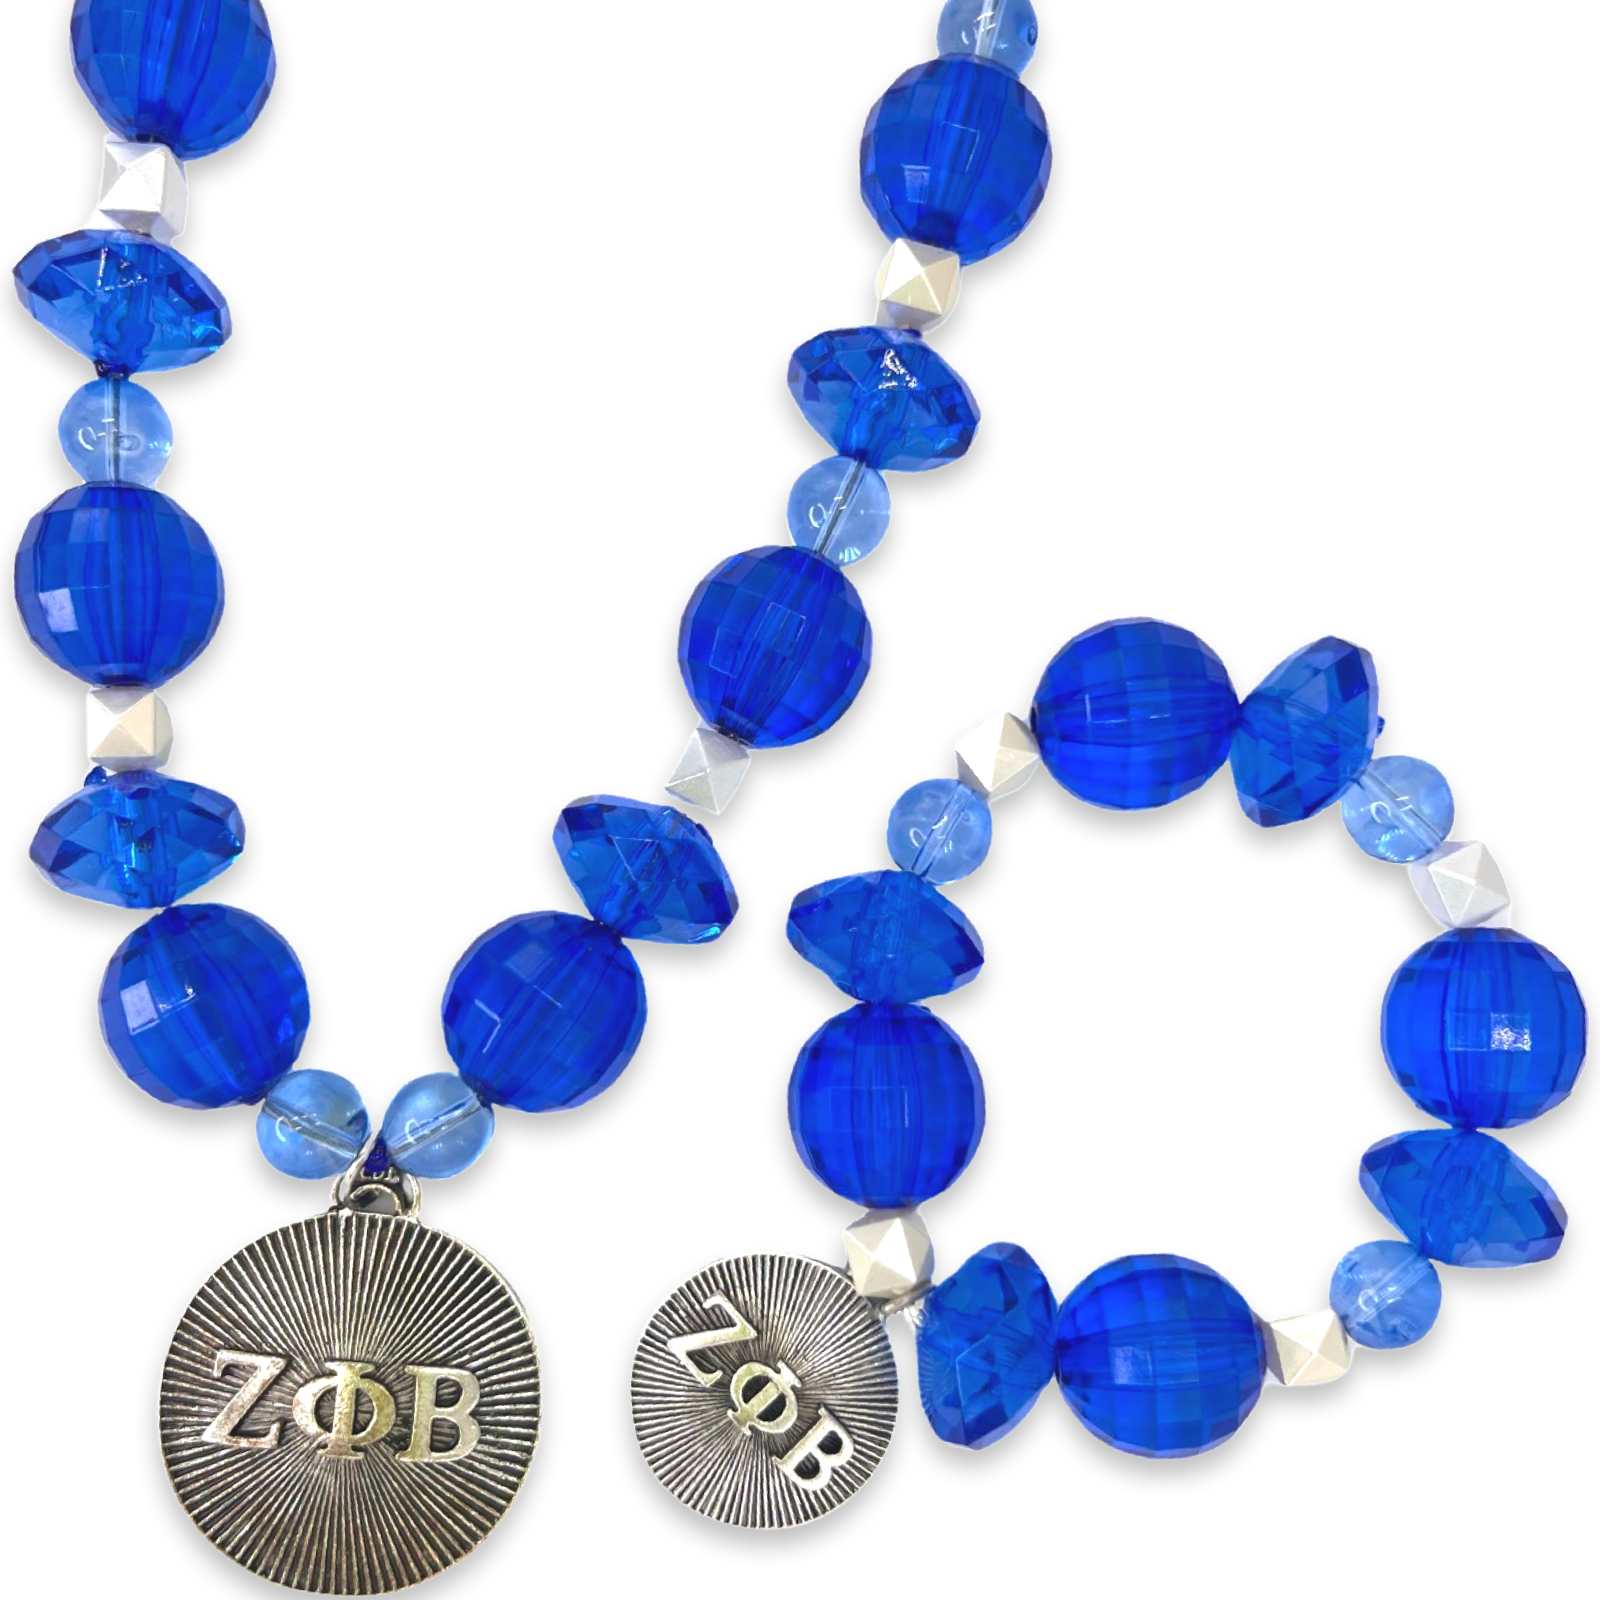 Zeta Much of Everything Necklace